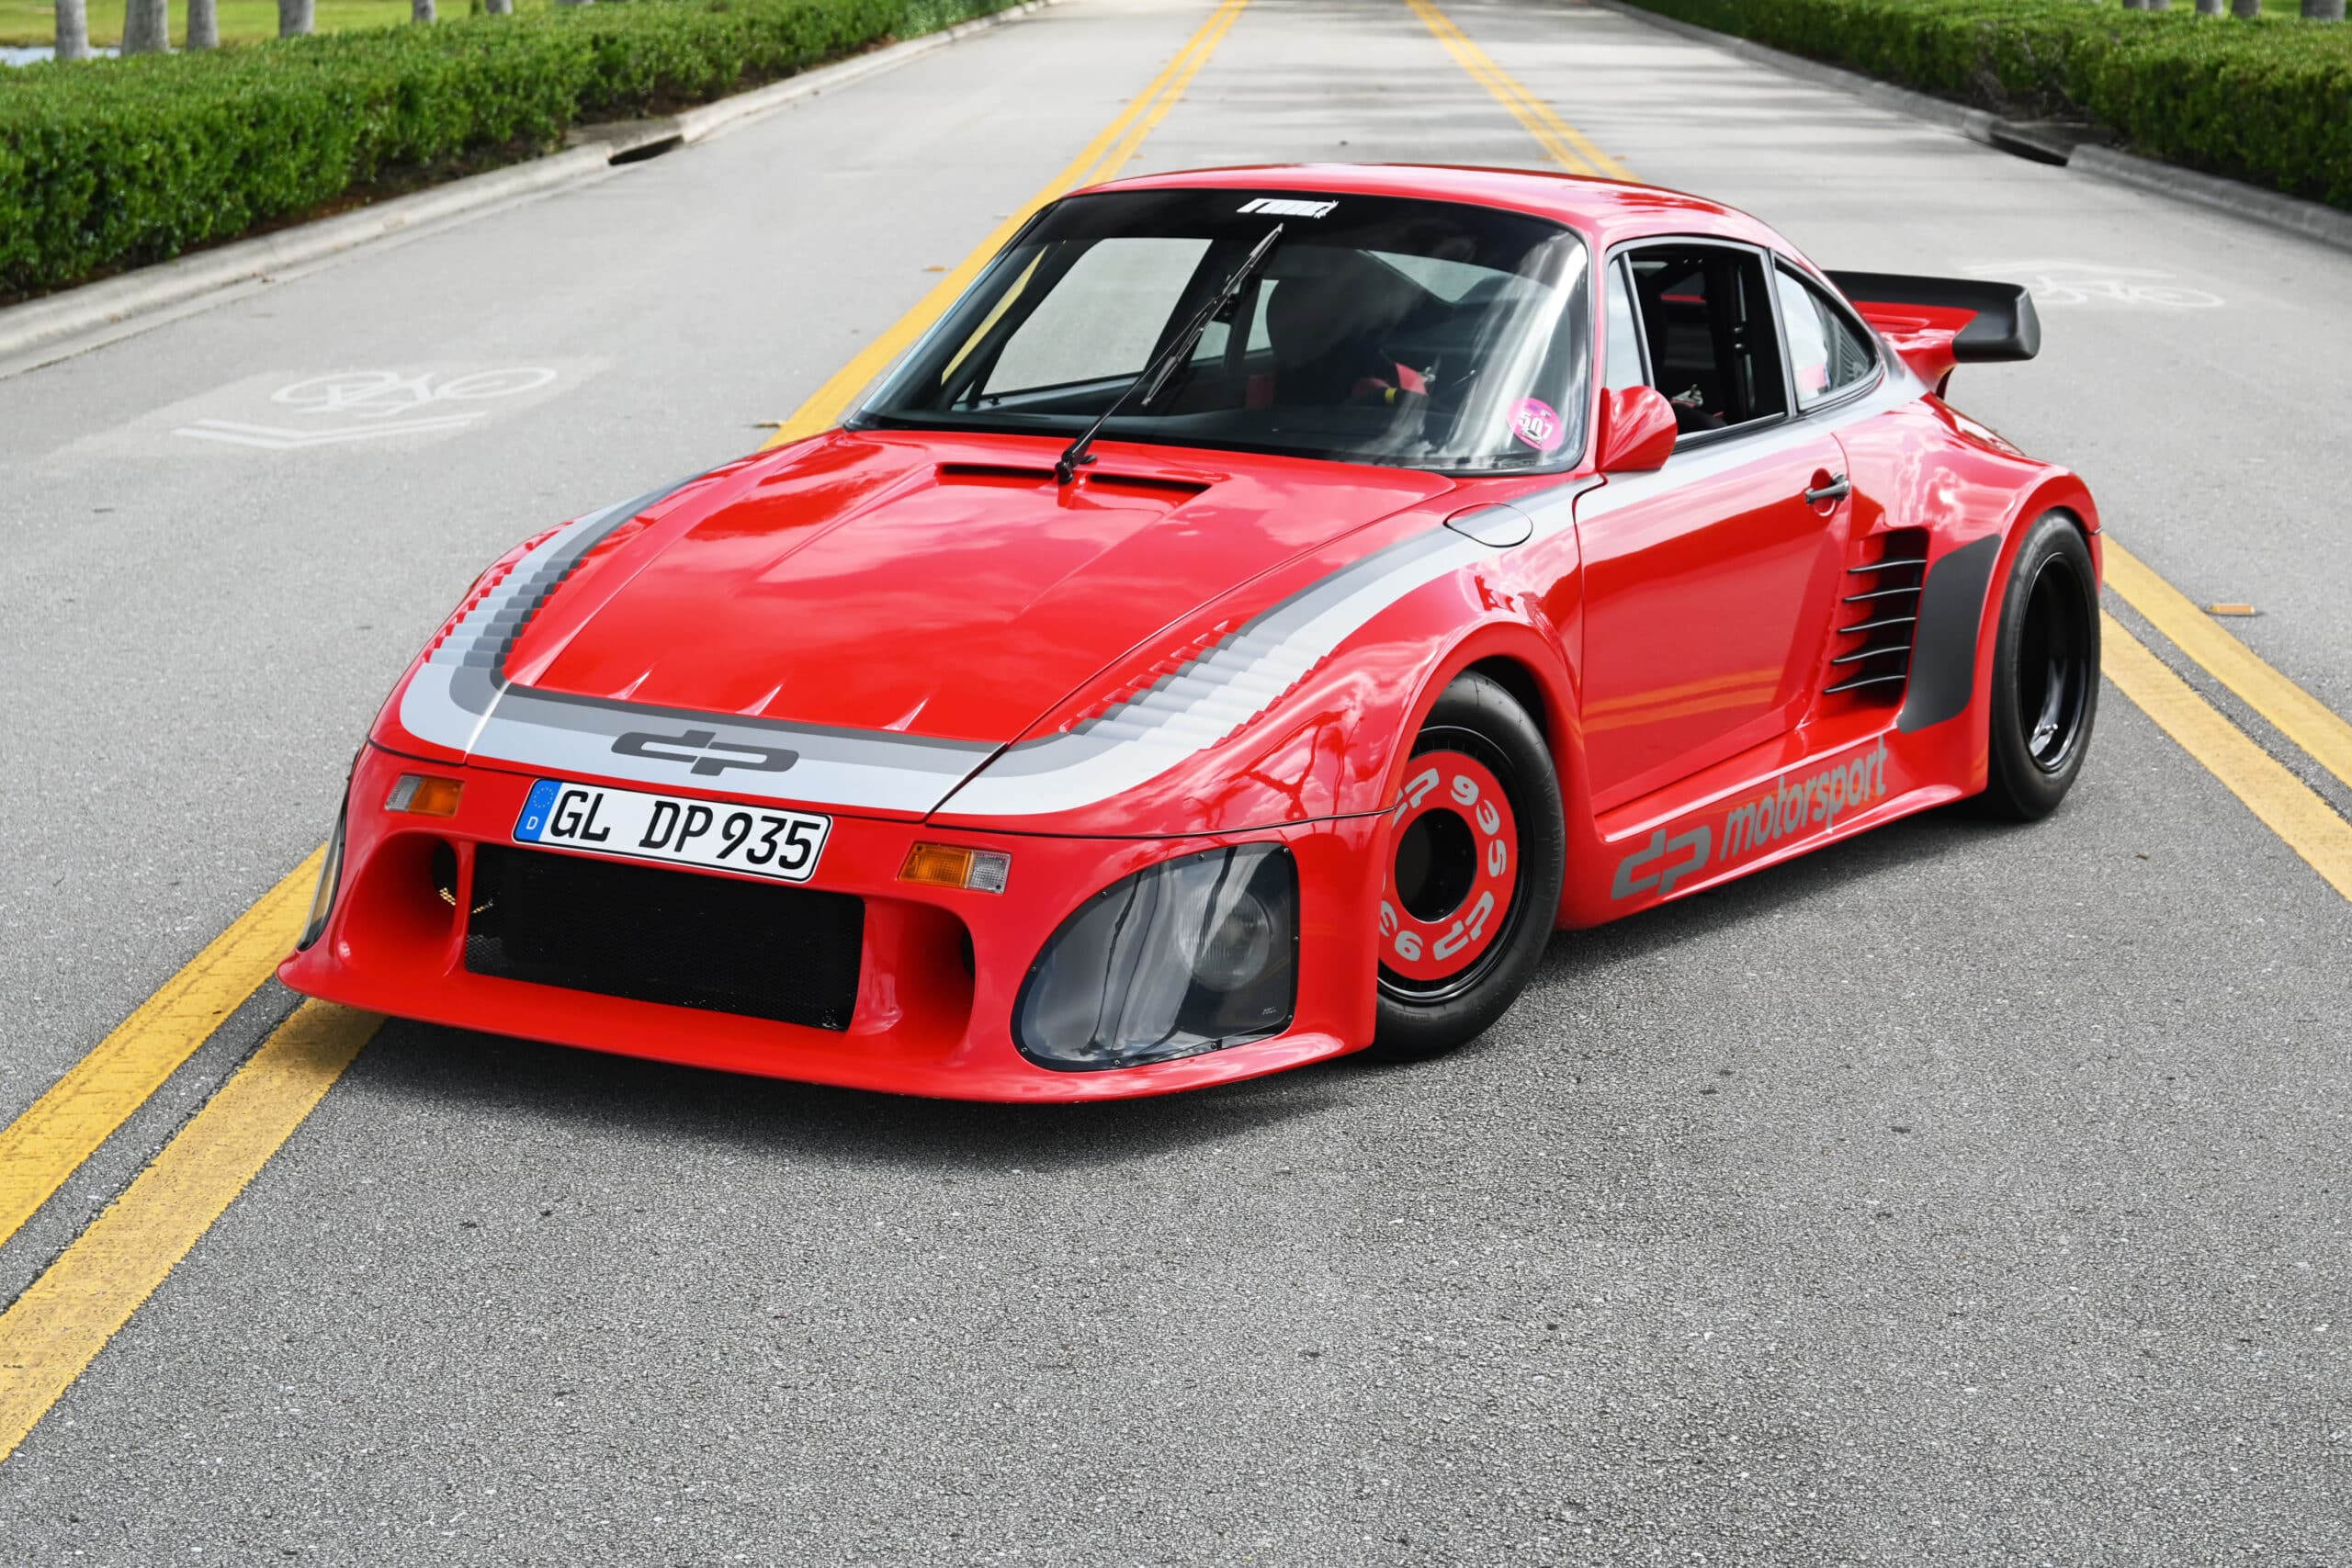 1989 DPII 935, DP VIN, ONE OF 4 LONG WINDSHIELD EVER MADE, COMPREHENSIVE 935 AERO, THE REAL DEAL, POWERED BY AN RS TUNING ENGINE